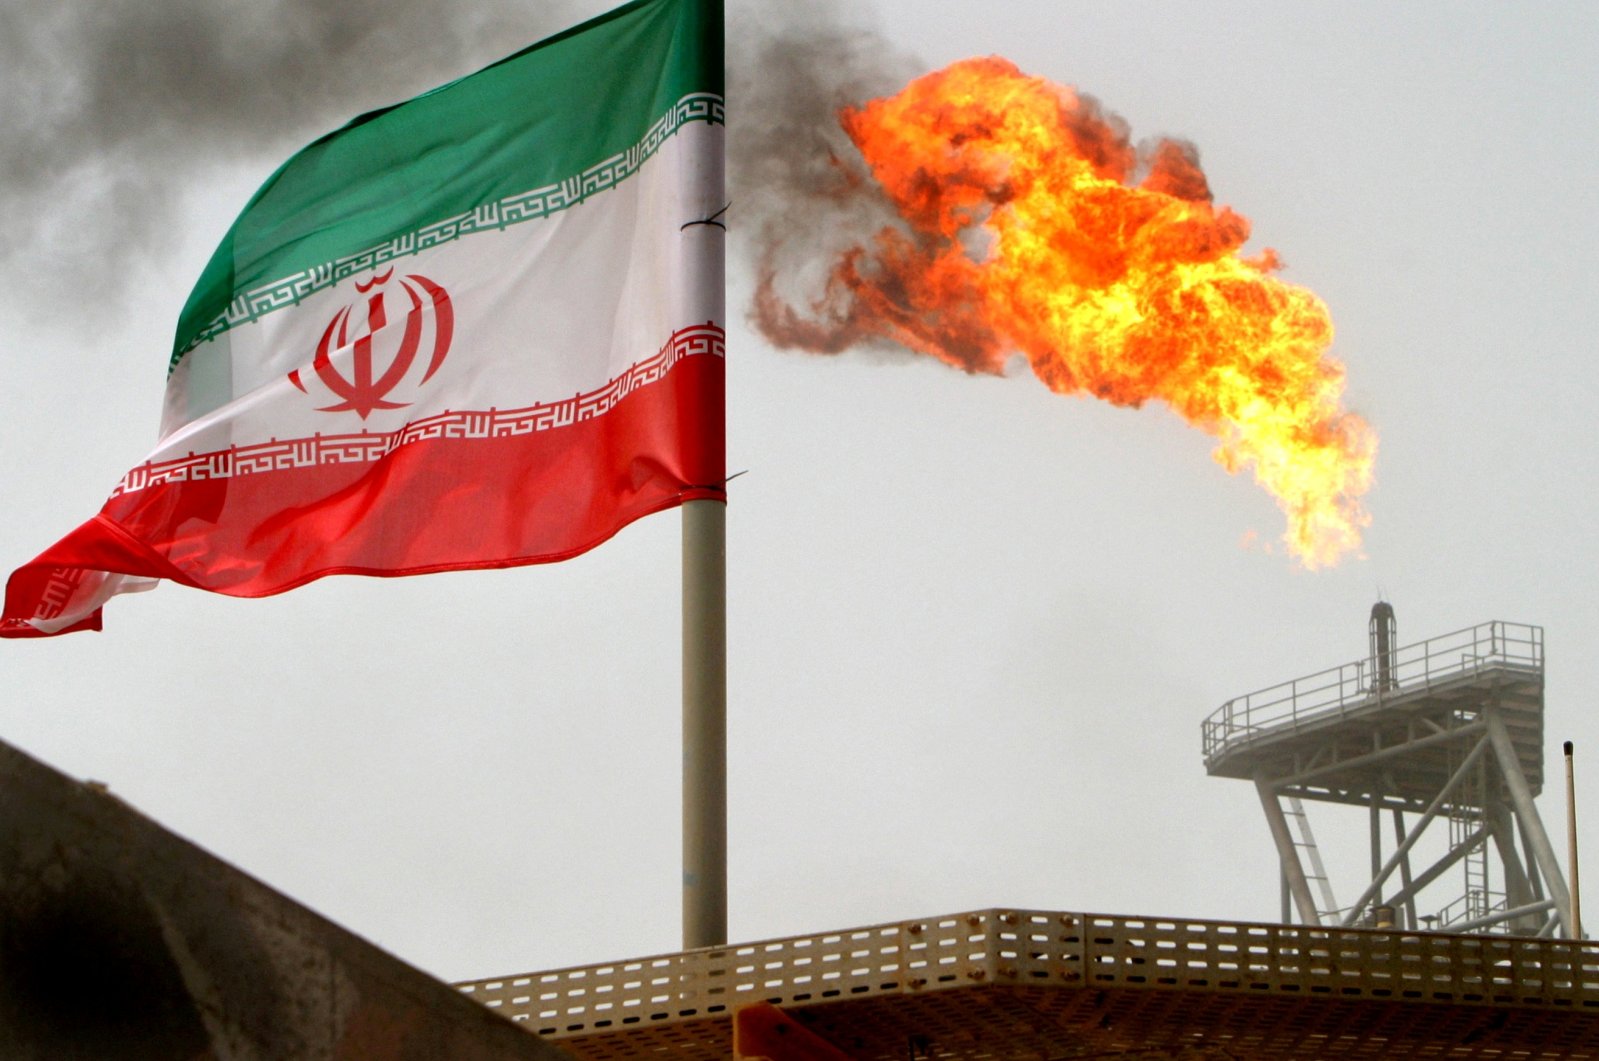 A gas flare on an oil production platform is seen alongside an Iranian flag in the Gulf, July 25, 2005. (Reuters Photo)